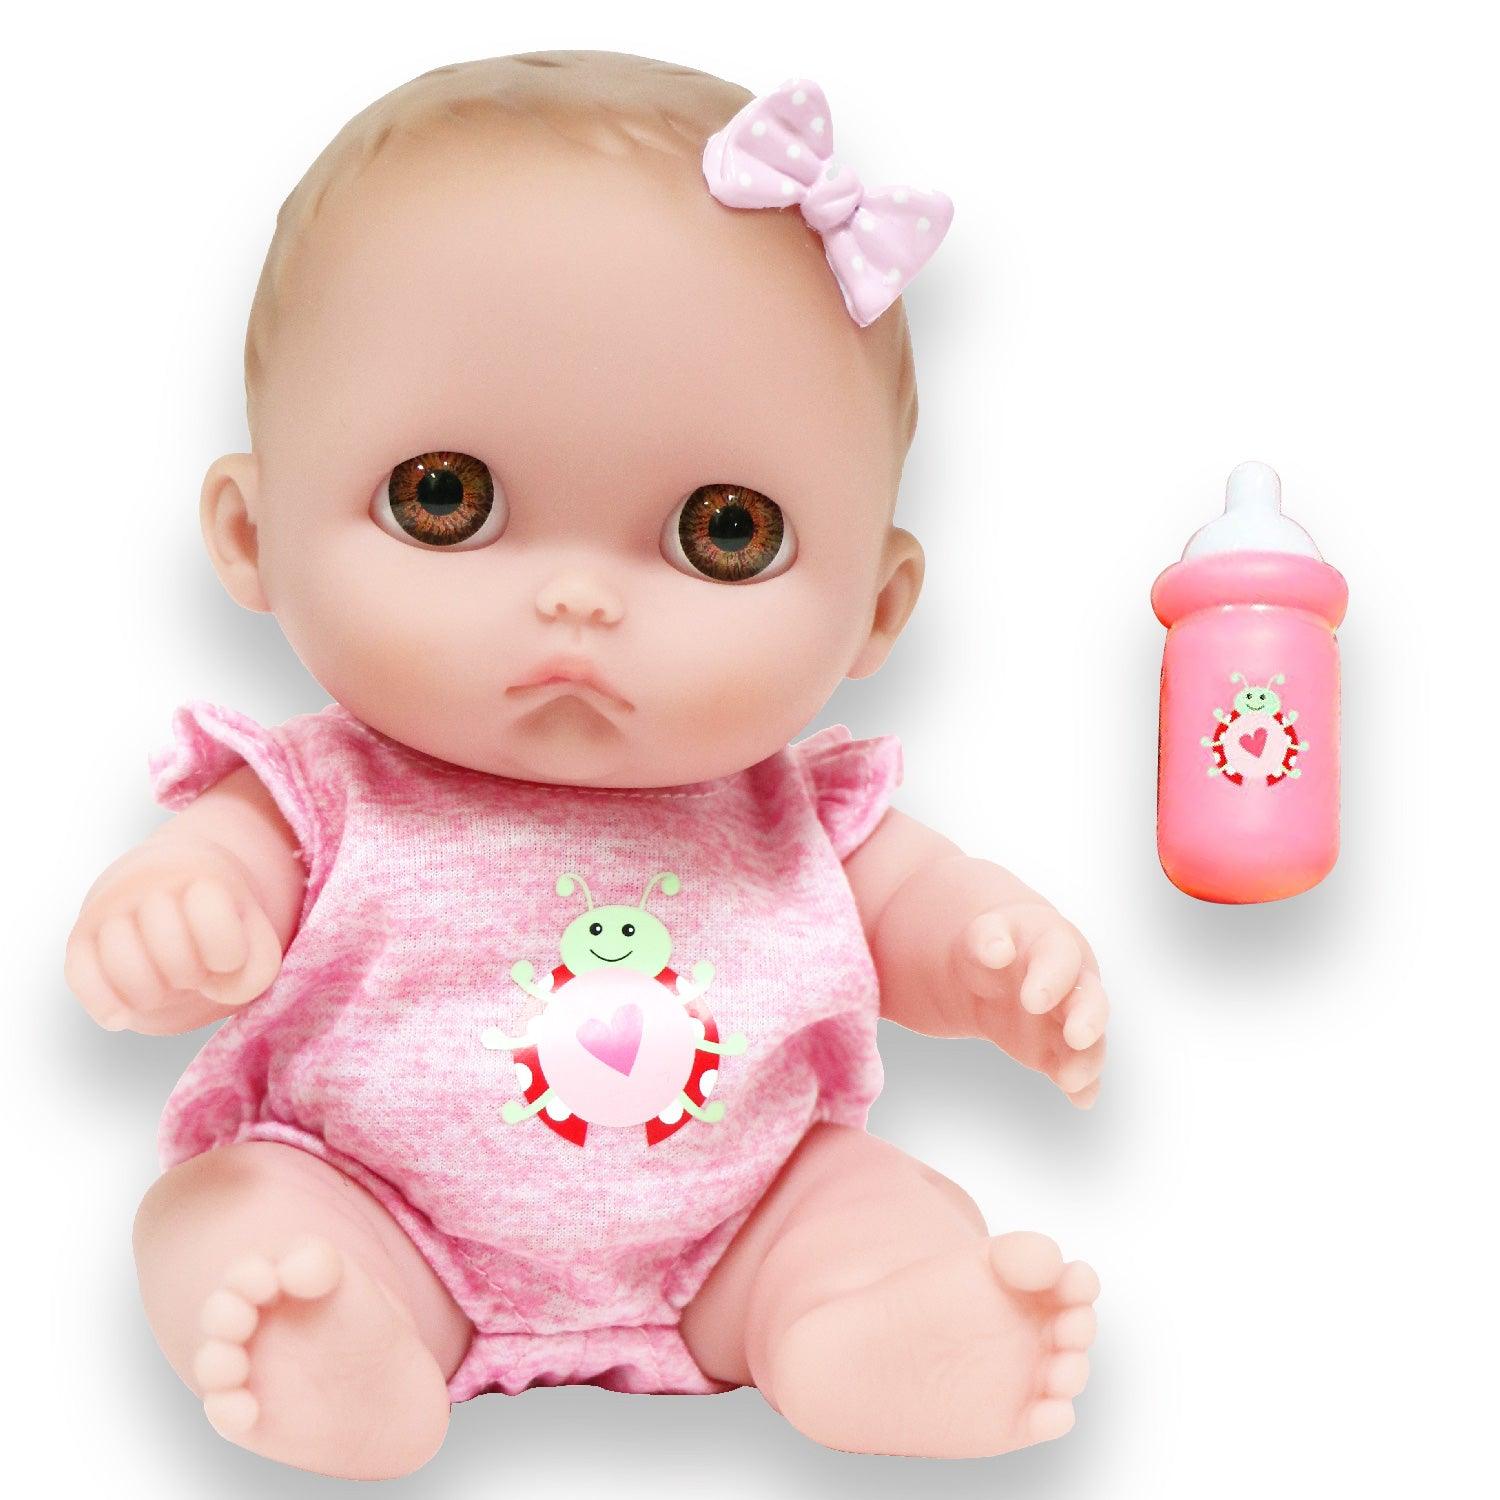 Lil Cutesies, Mimi 8.5" All Vinyl Baby Doll with Brown Eyes and Removable Outfit Ages 2+ - JC Toys Group Inc.